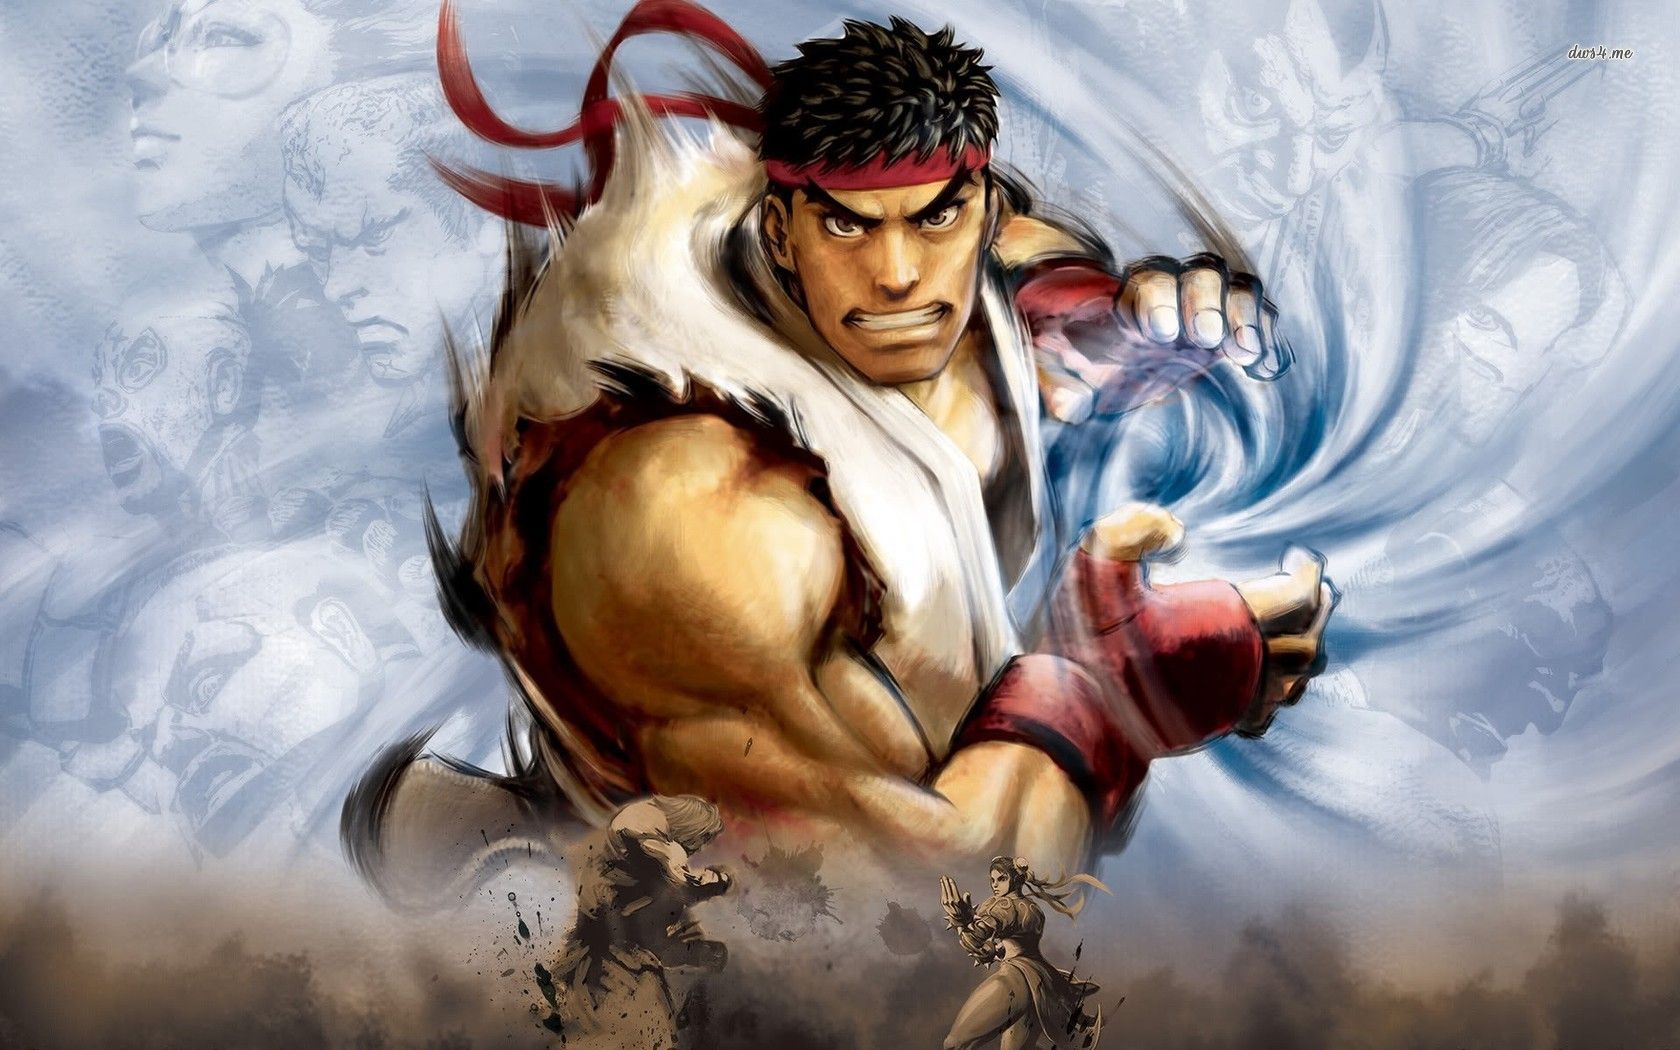 Ryu - Street Fighter IV wallpaper - Game wallpapers - #13906